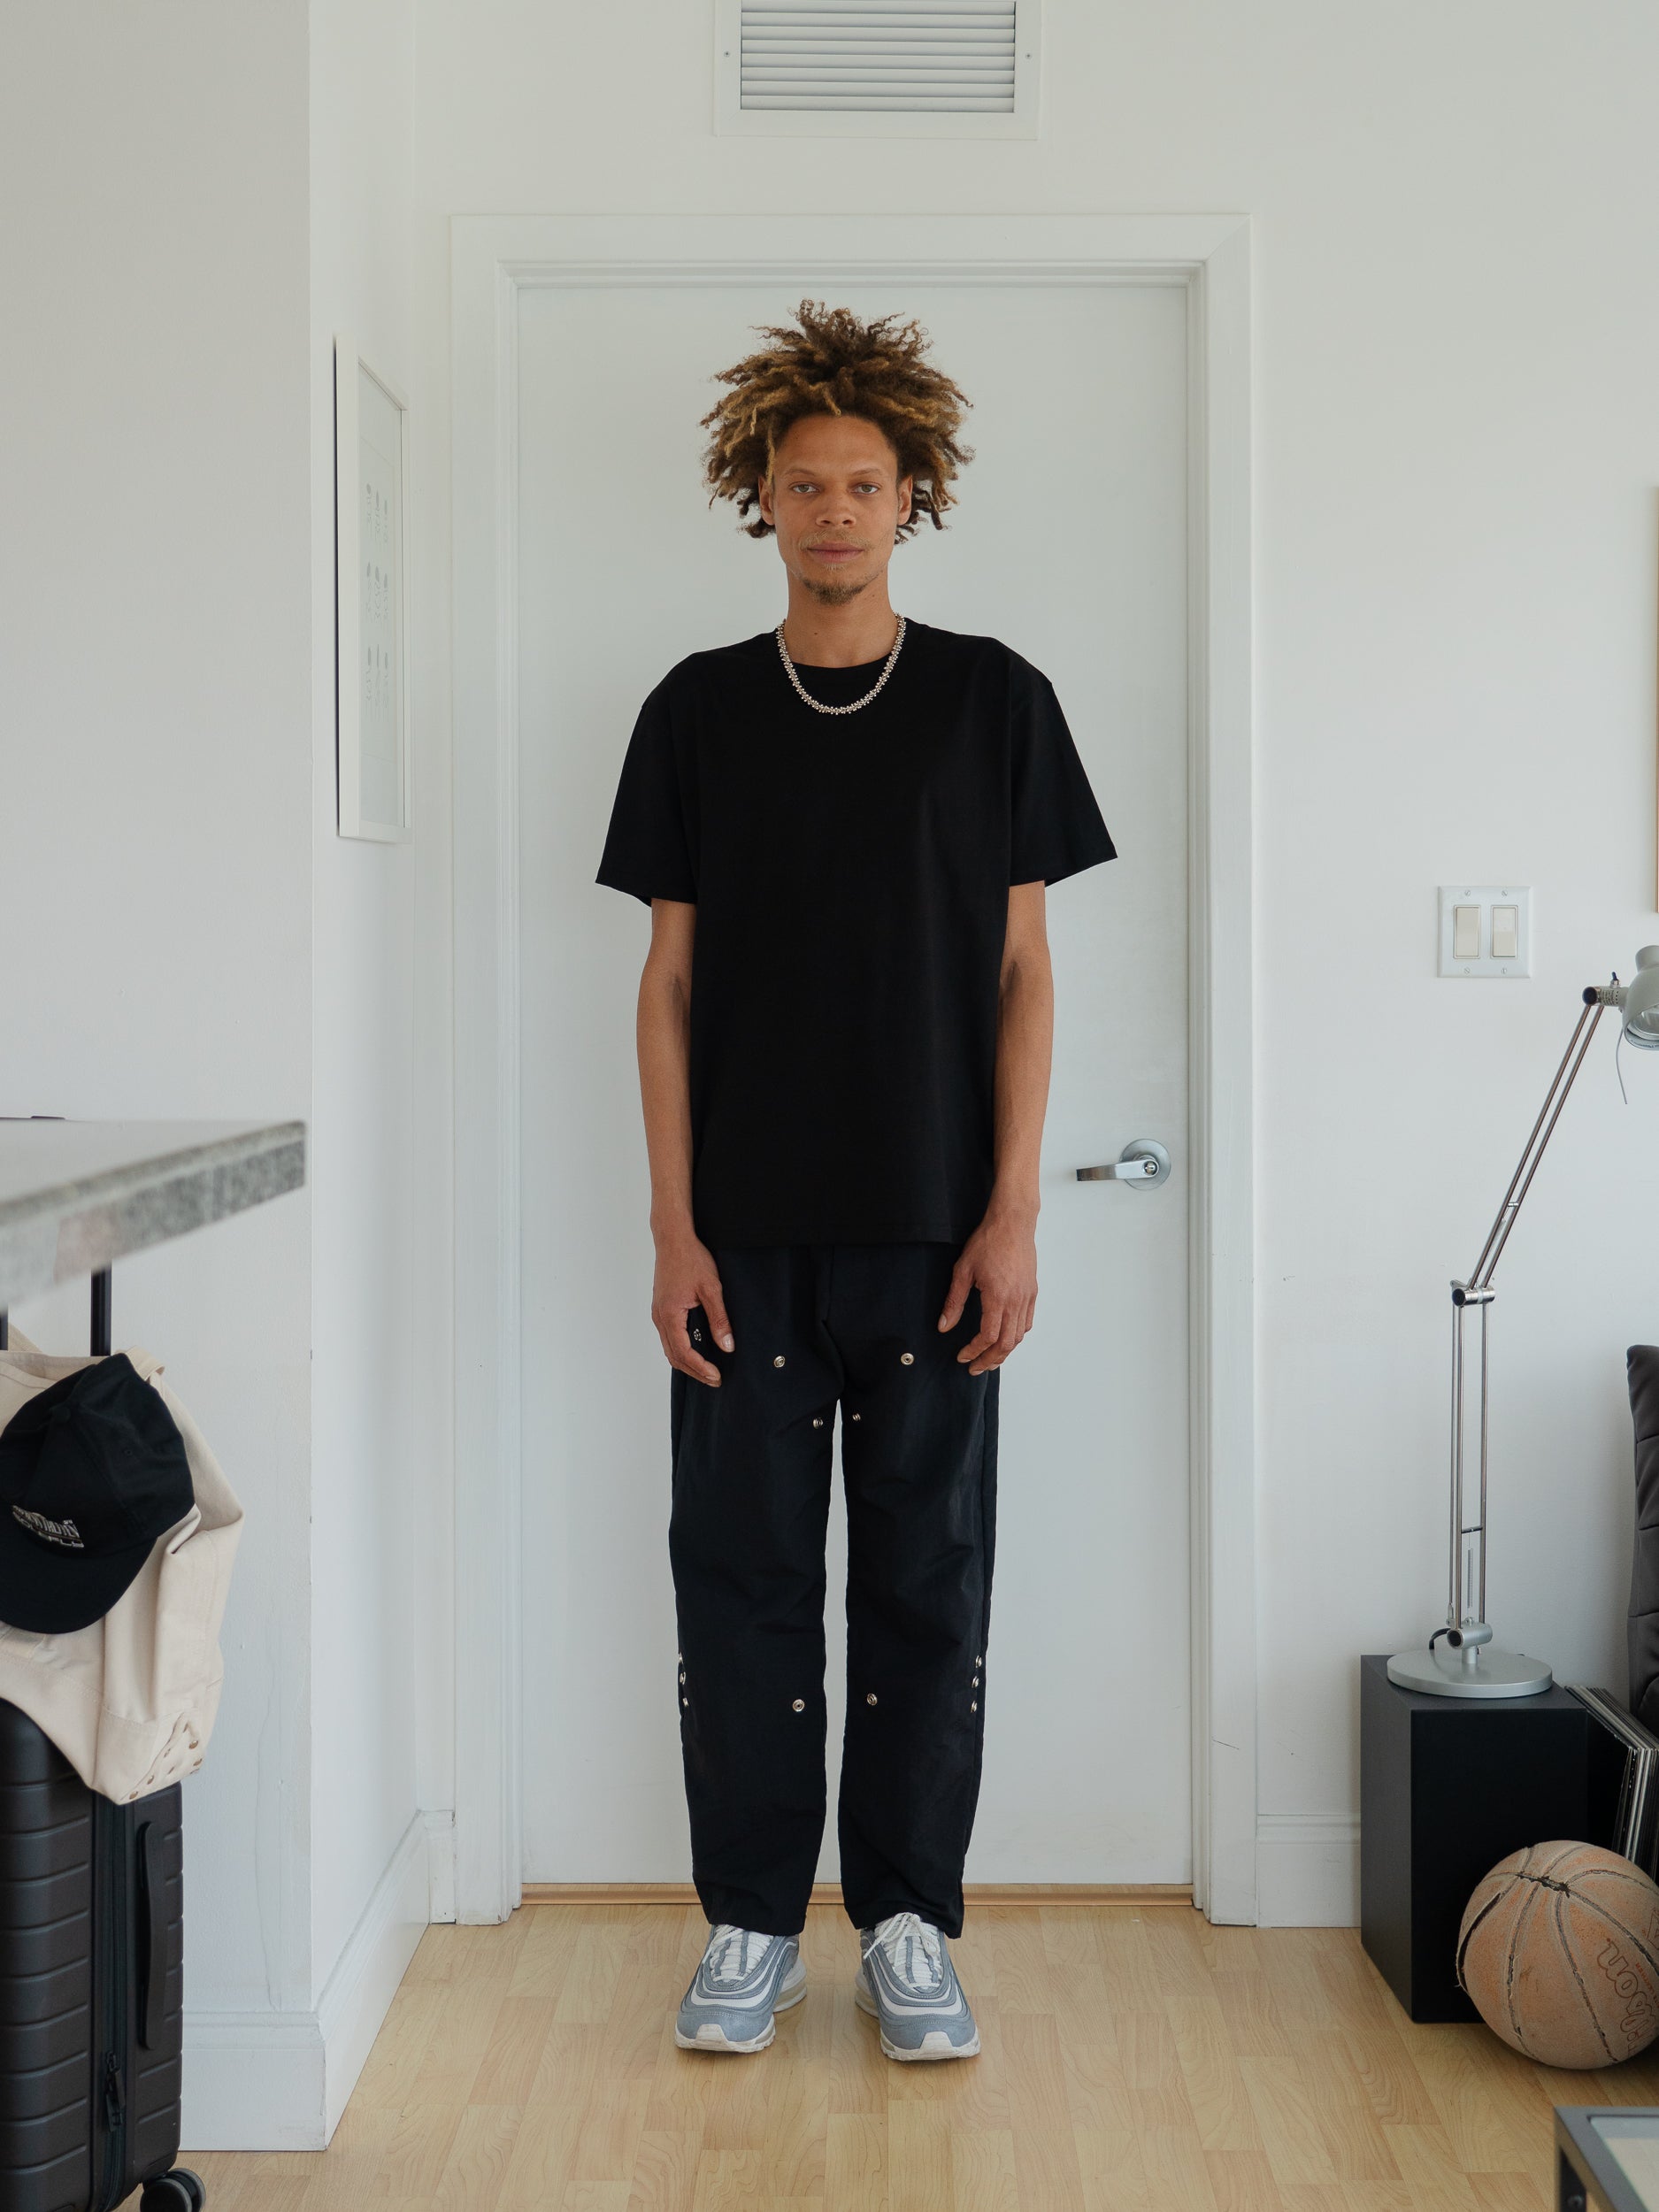 SOLEFLY Day To Day Black Tee (3 PACK)